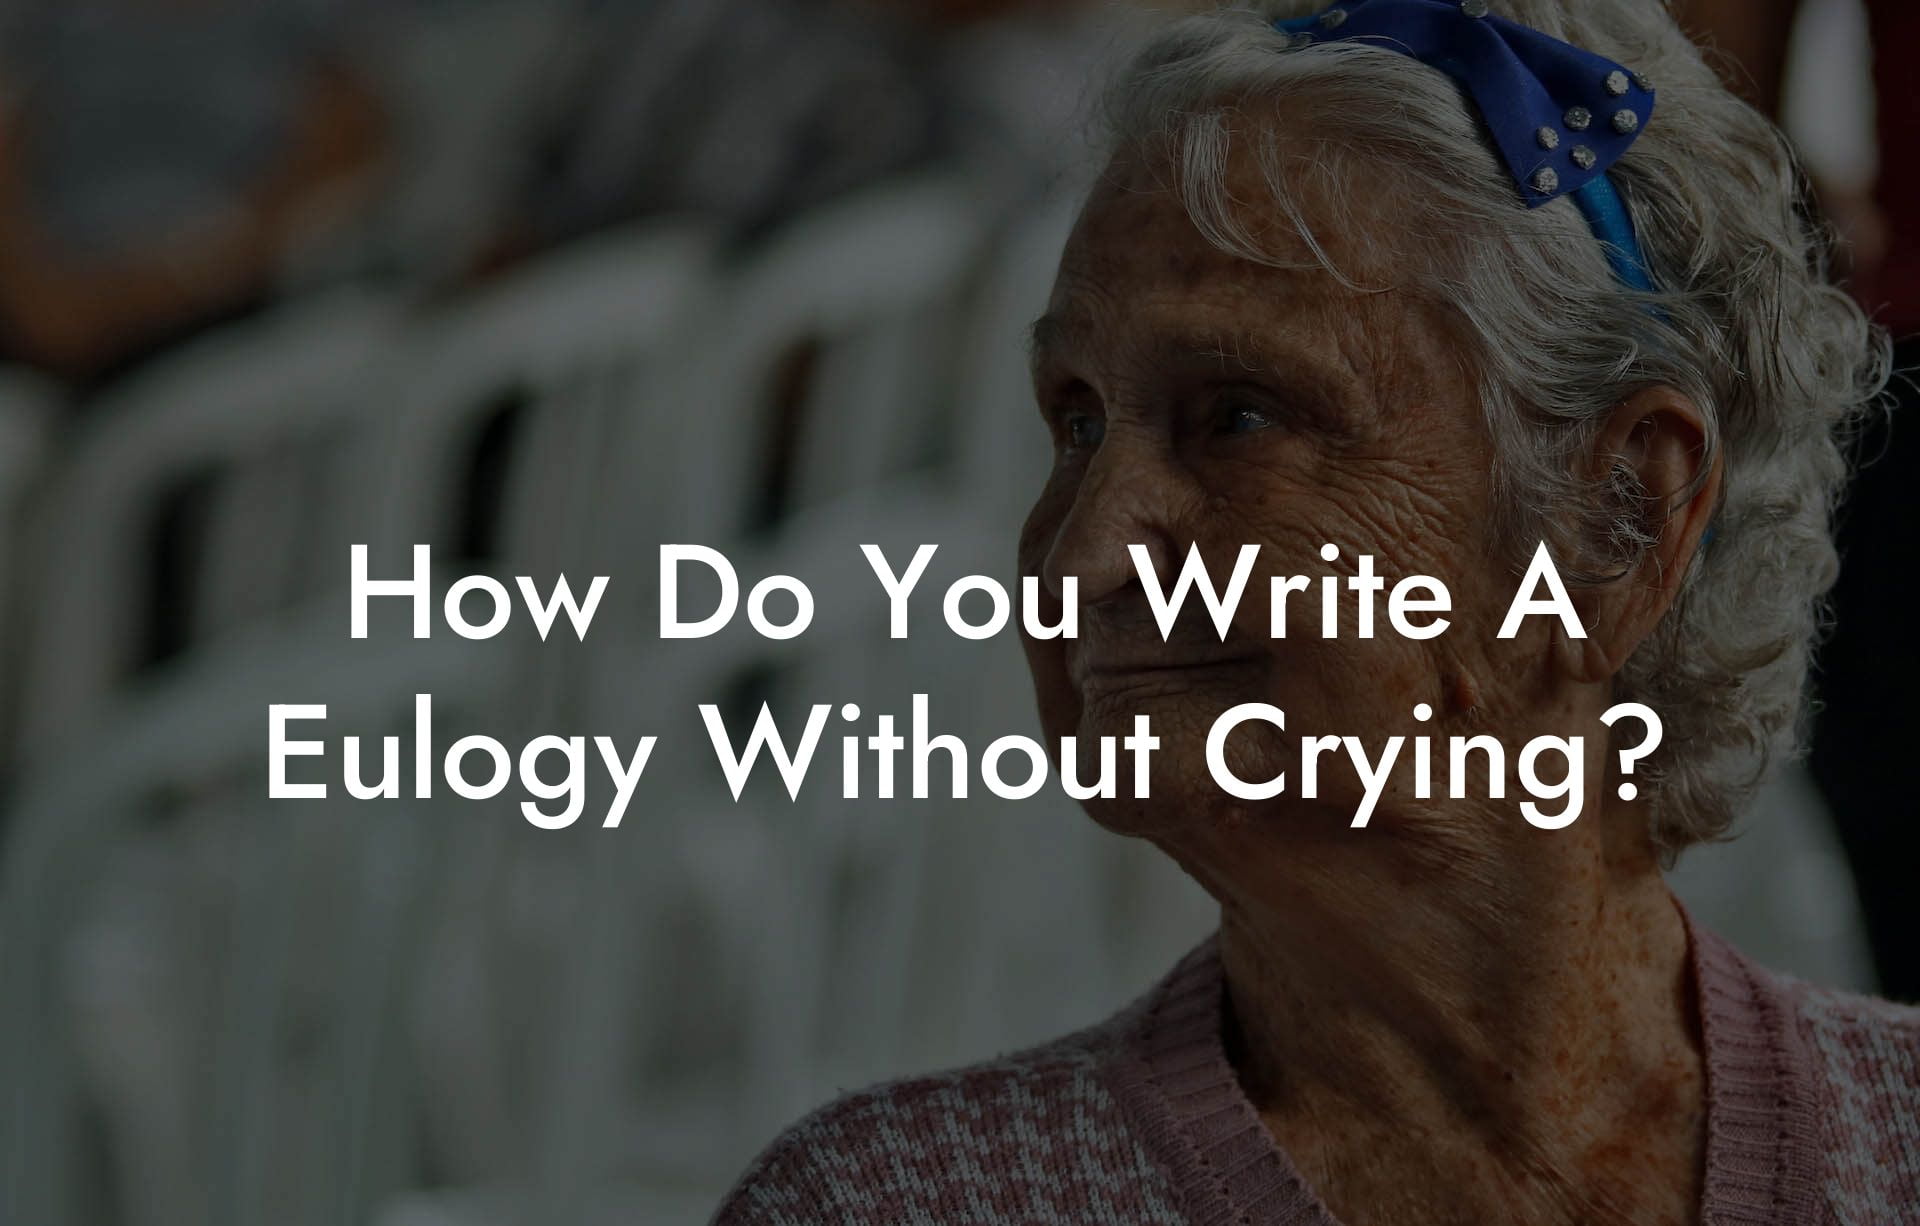 How Do You Write A Eulogy Without Crying?